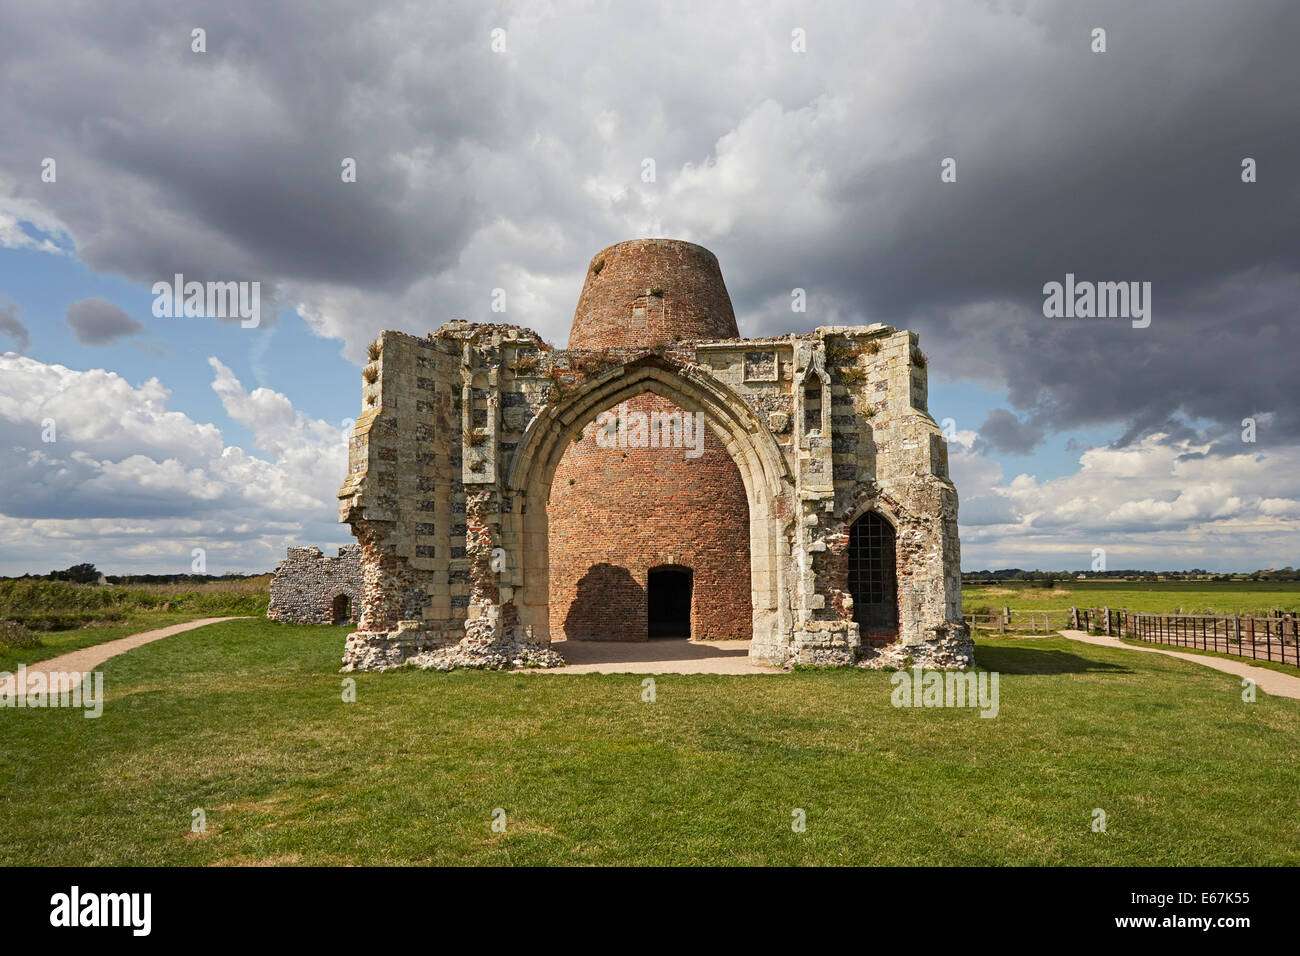 Saint Benet's abbey gate house near Ludham on the Norfolk Broads with the remains of a windmill built into the abbey walls Stock Photo